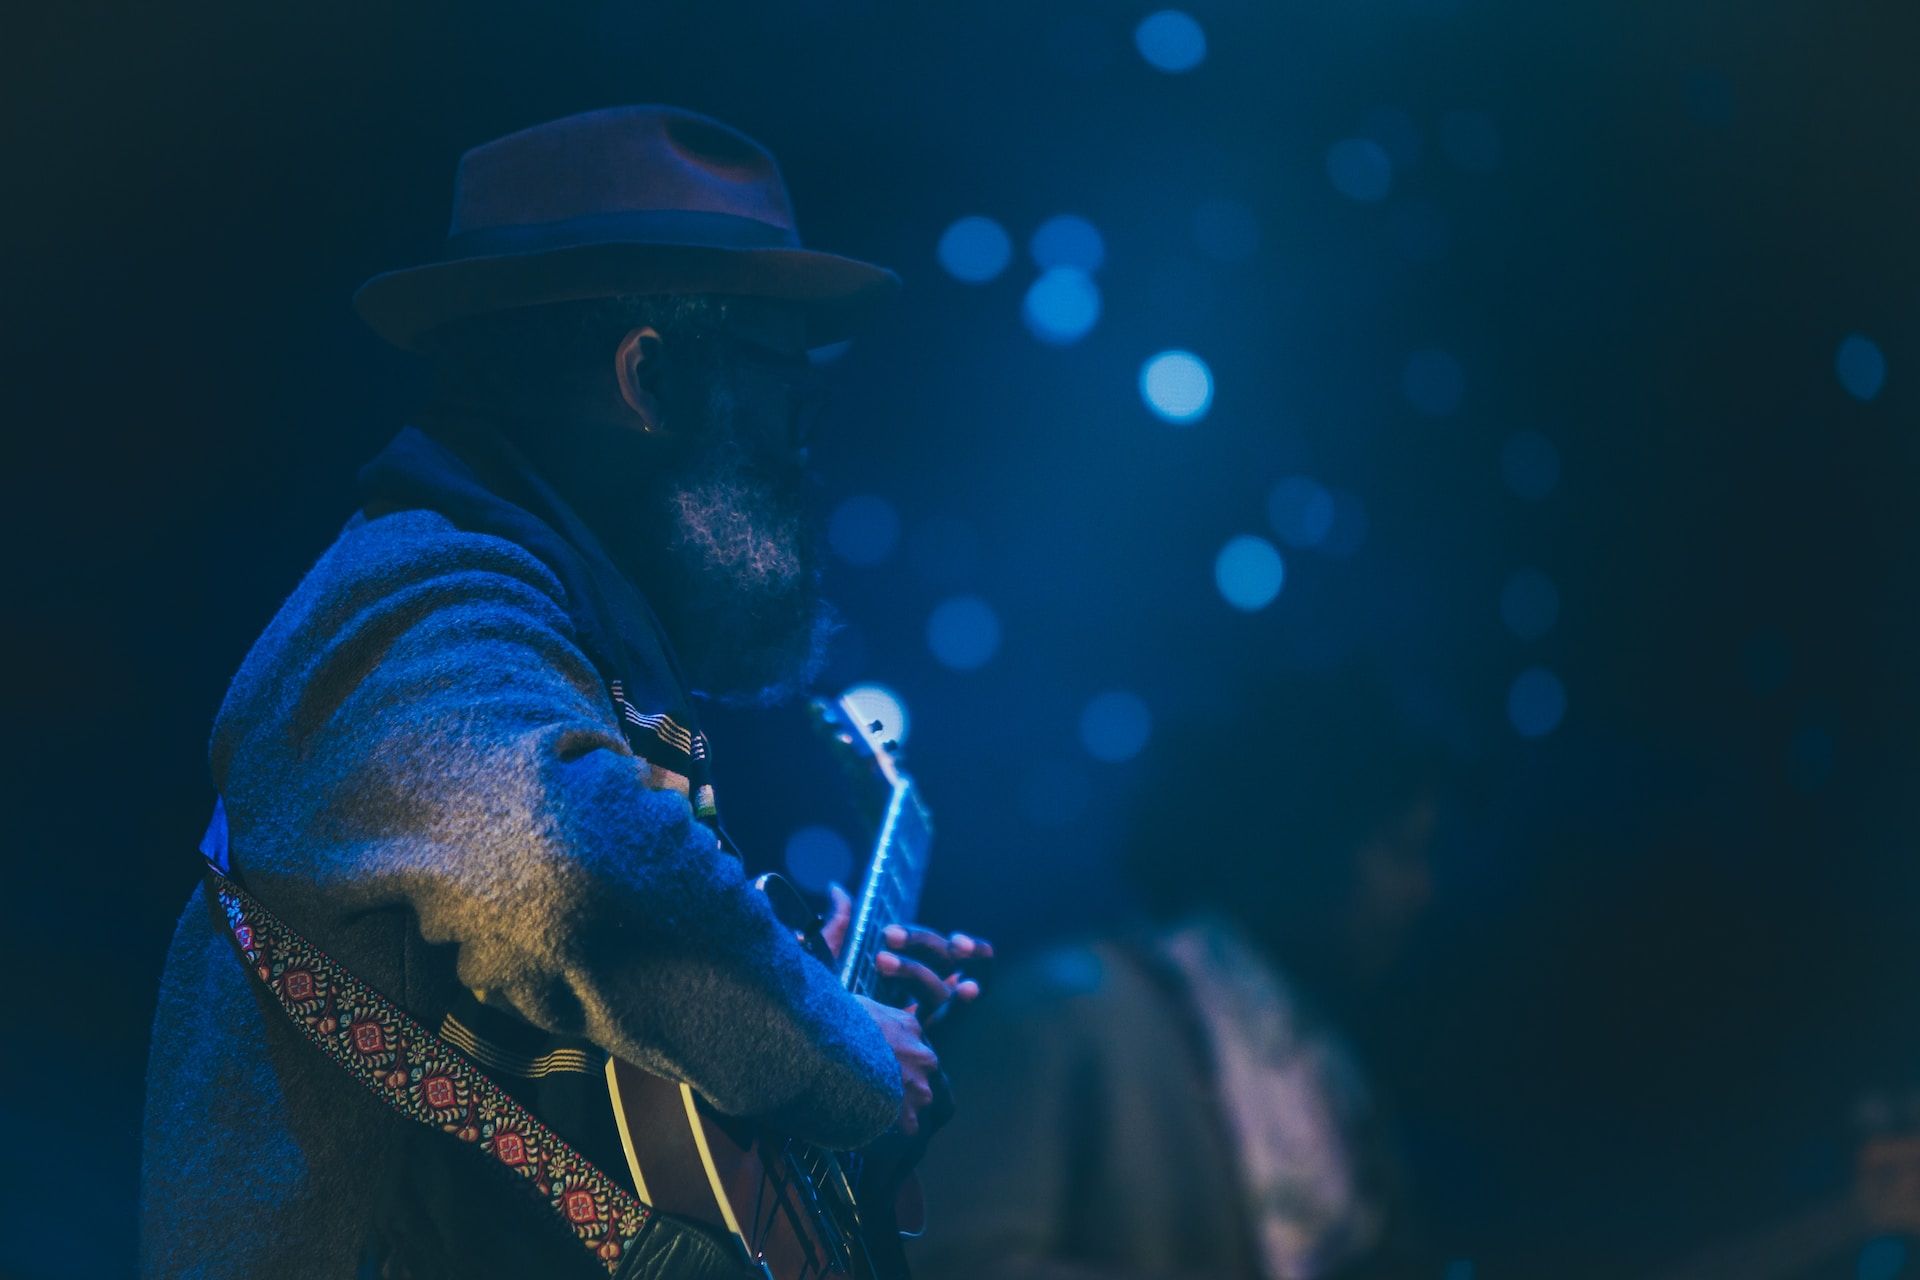 Blues musician performing in a darkened room